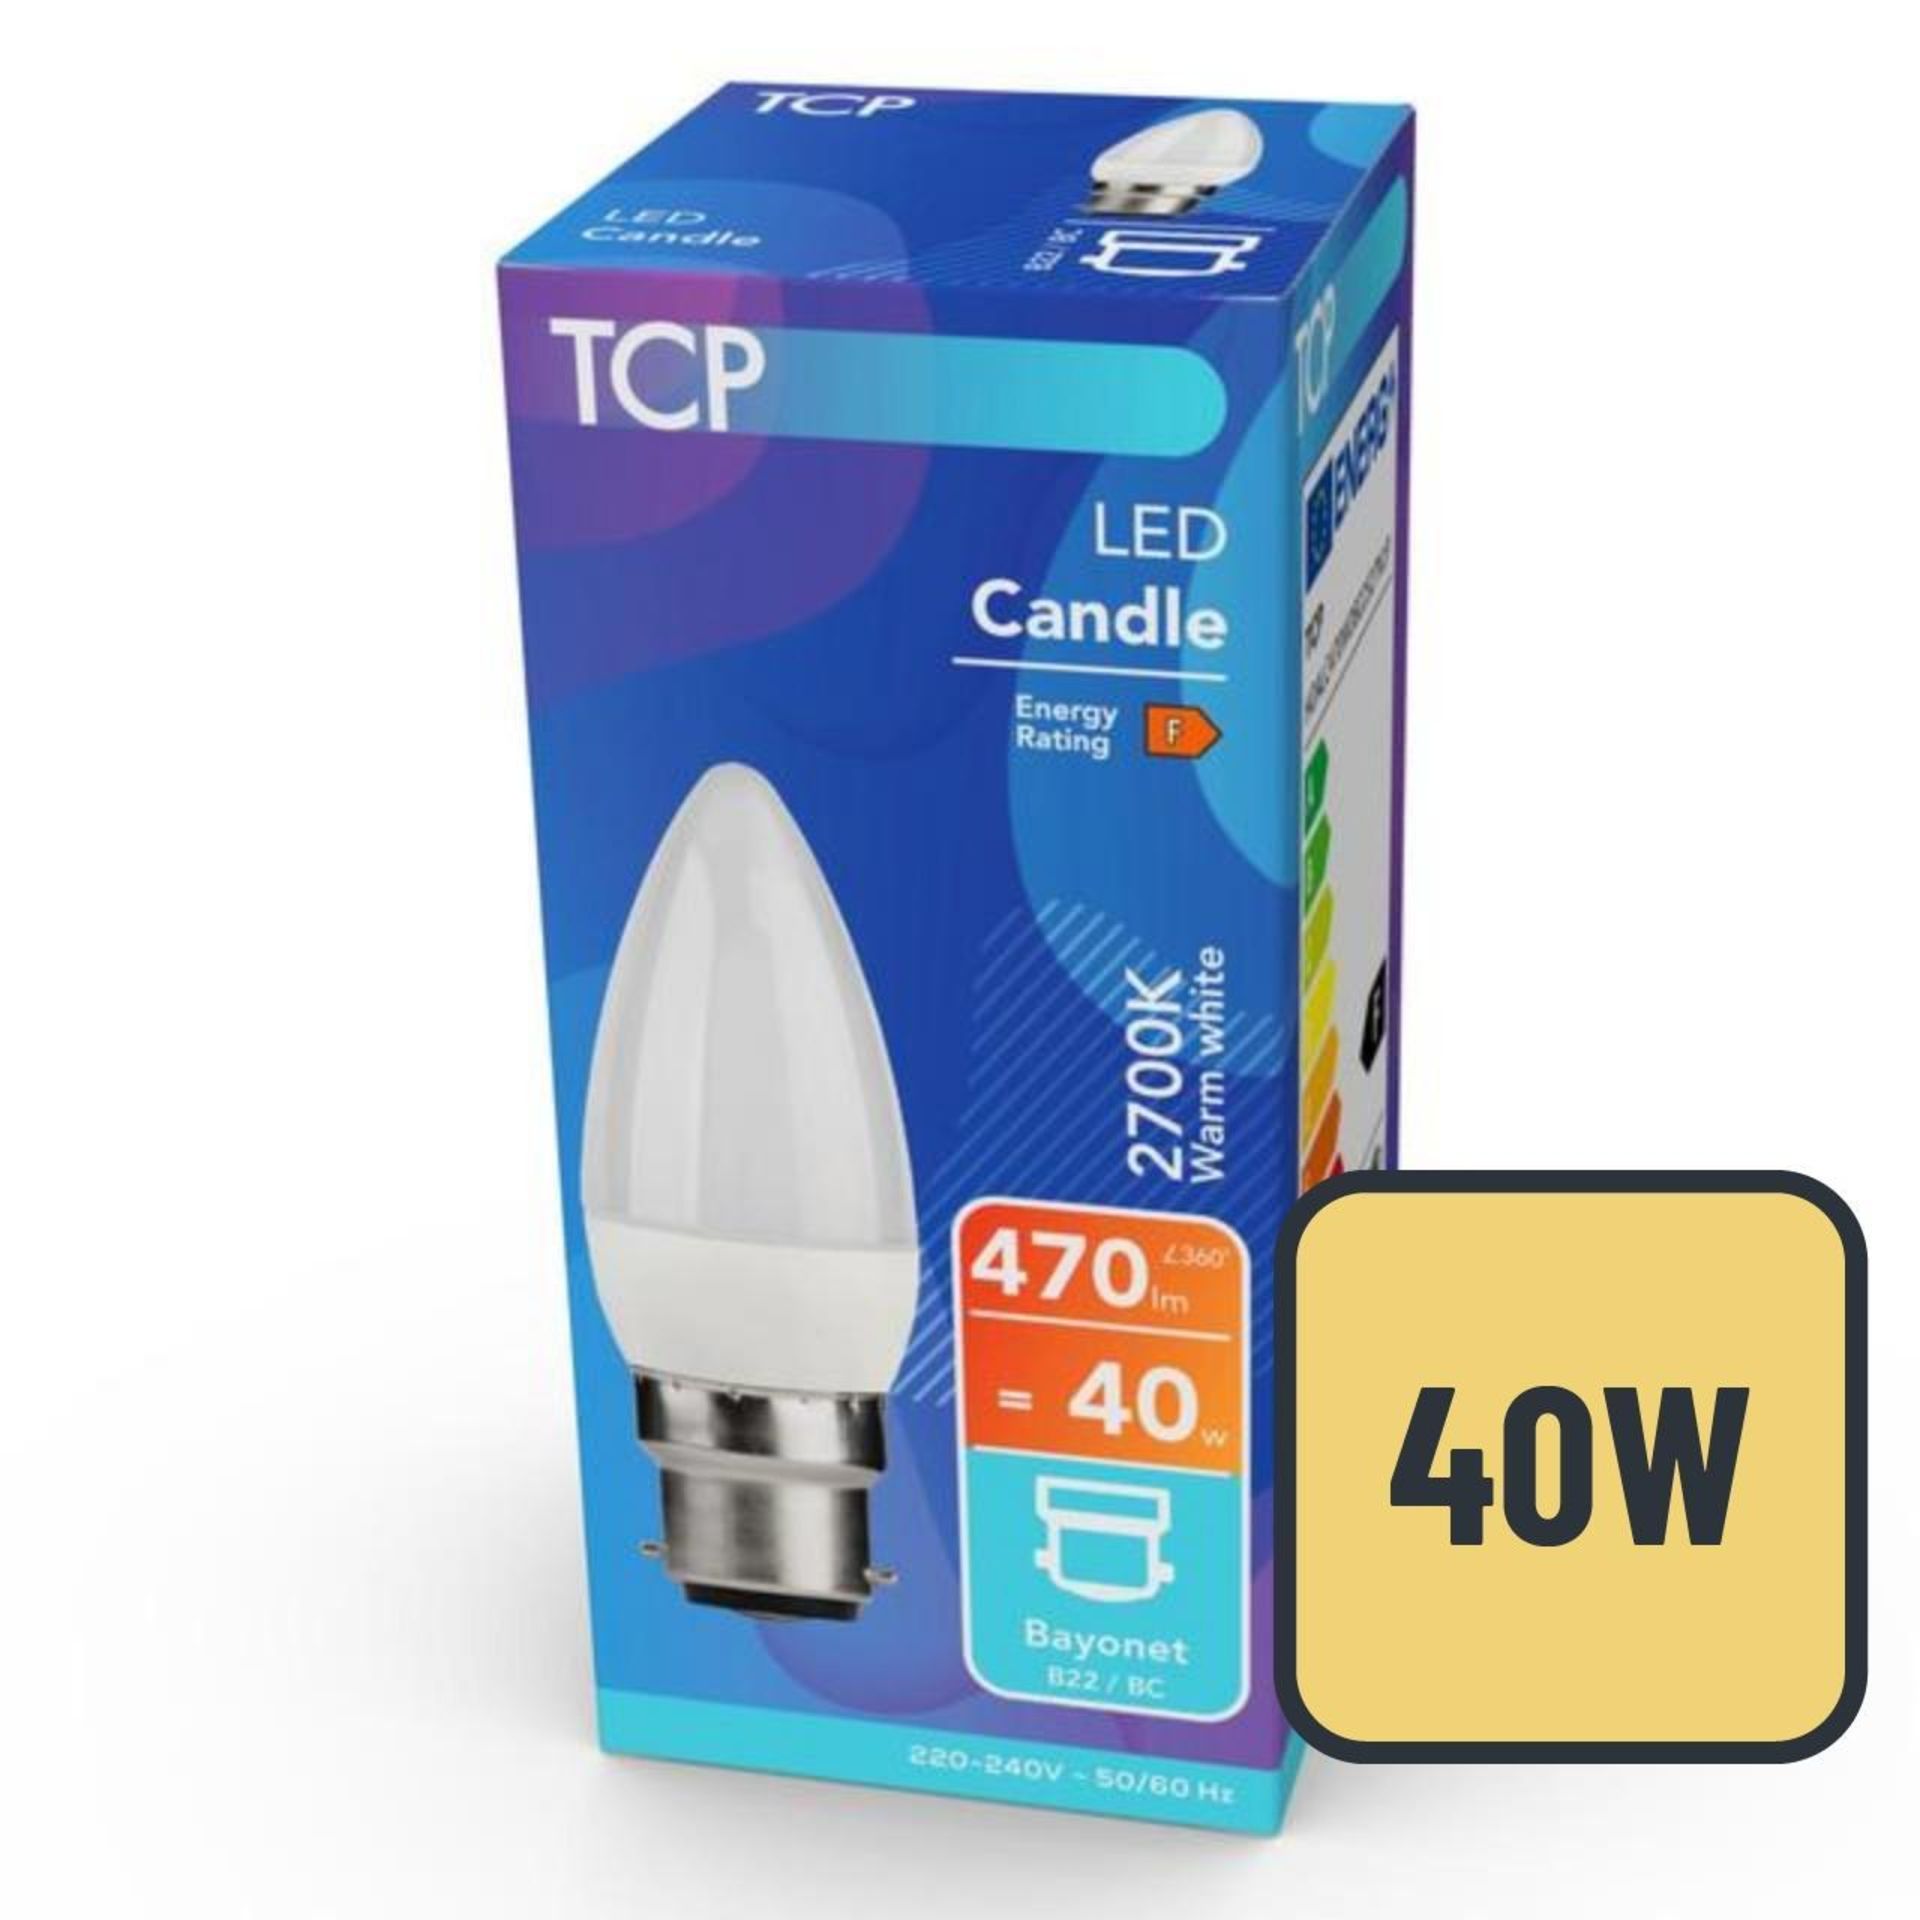 TRADE PALLET TO CONTAIN 894x BRAND NEW TCP LED 470 Lumen Non-Dimmable Coated E14 Candle Bulbs